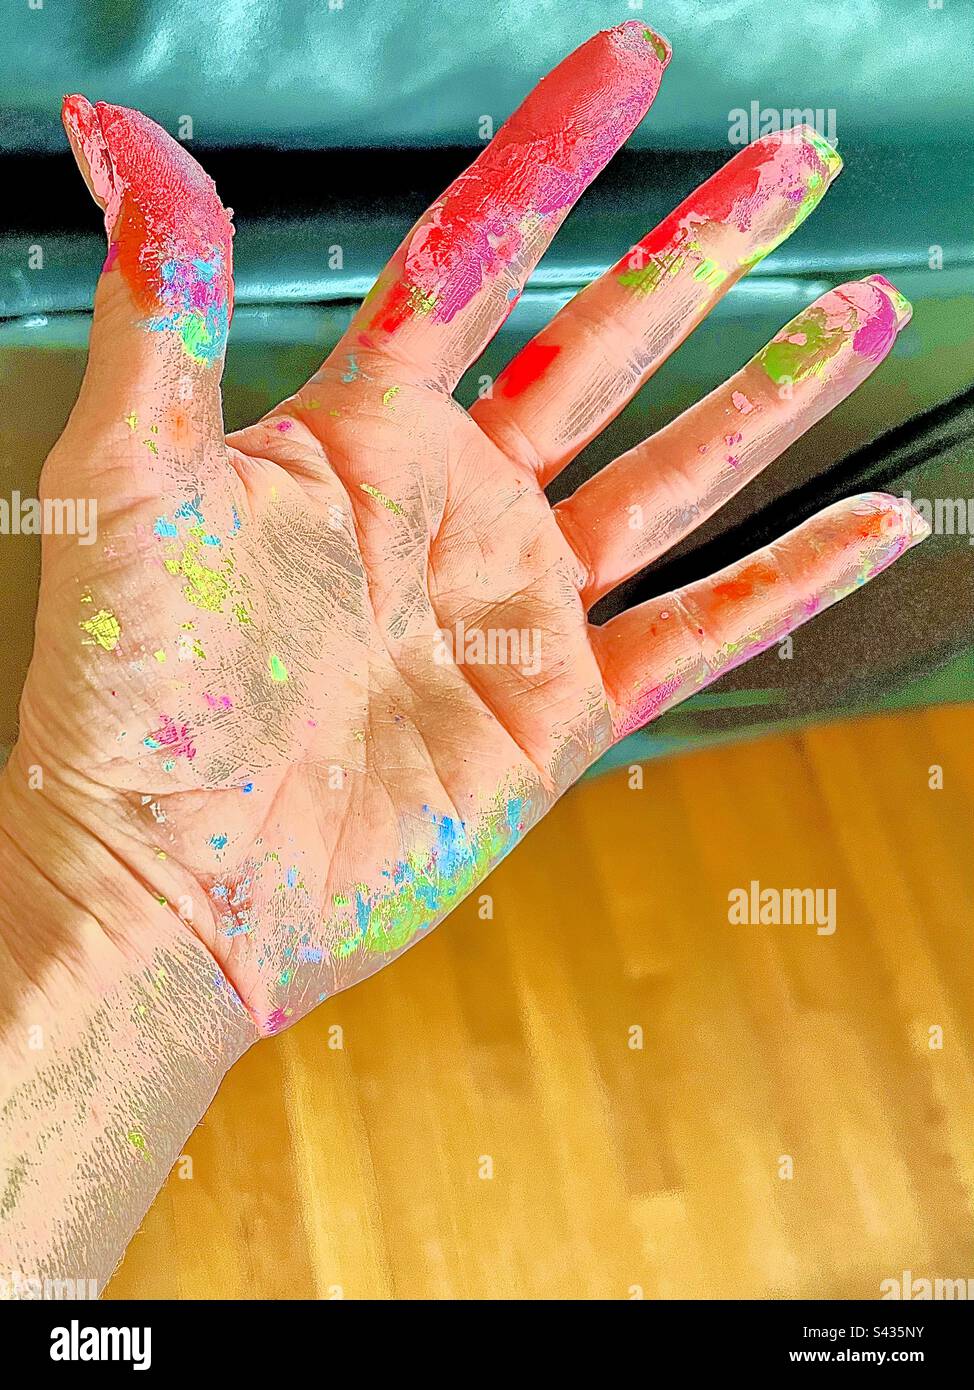 Graphic closeup of Caucasian hand with open palm and fingers messy with paint. Includes print space. Stock Photo